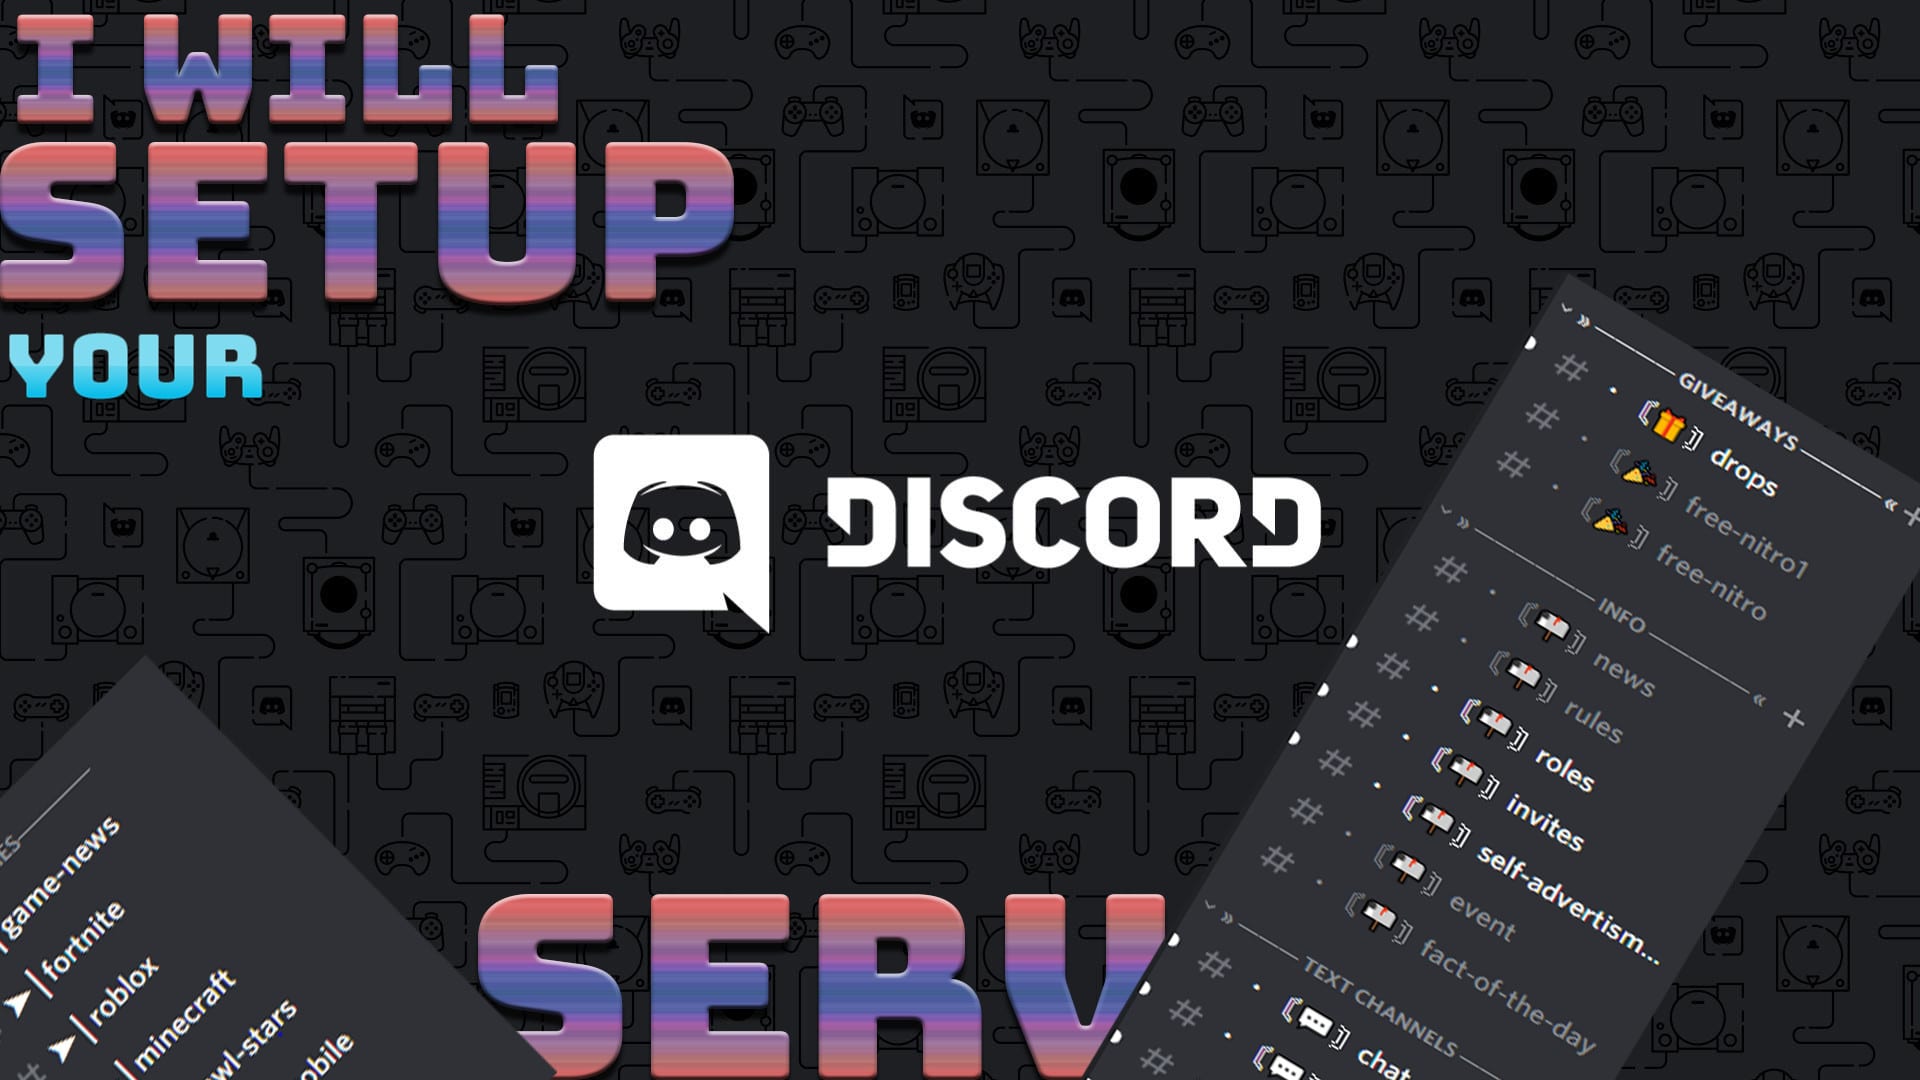 Setup Your Discord Server Within 24 Hours By Teveproduction